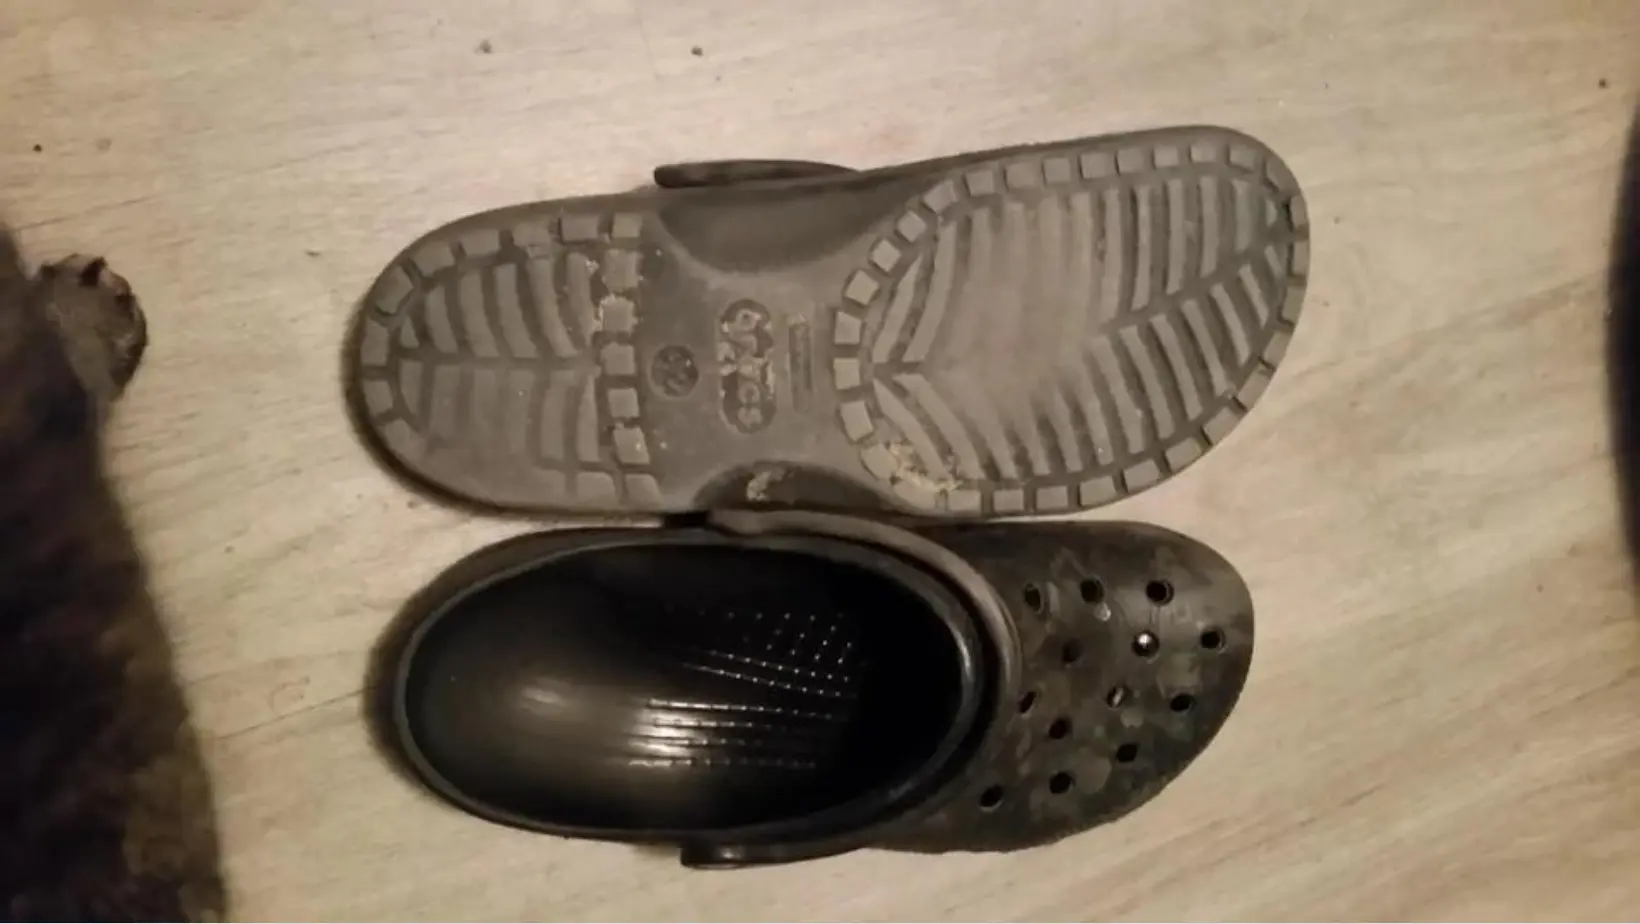 Why Should You Buy Old Crocs Shoes